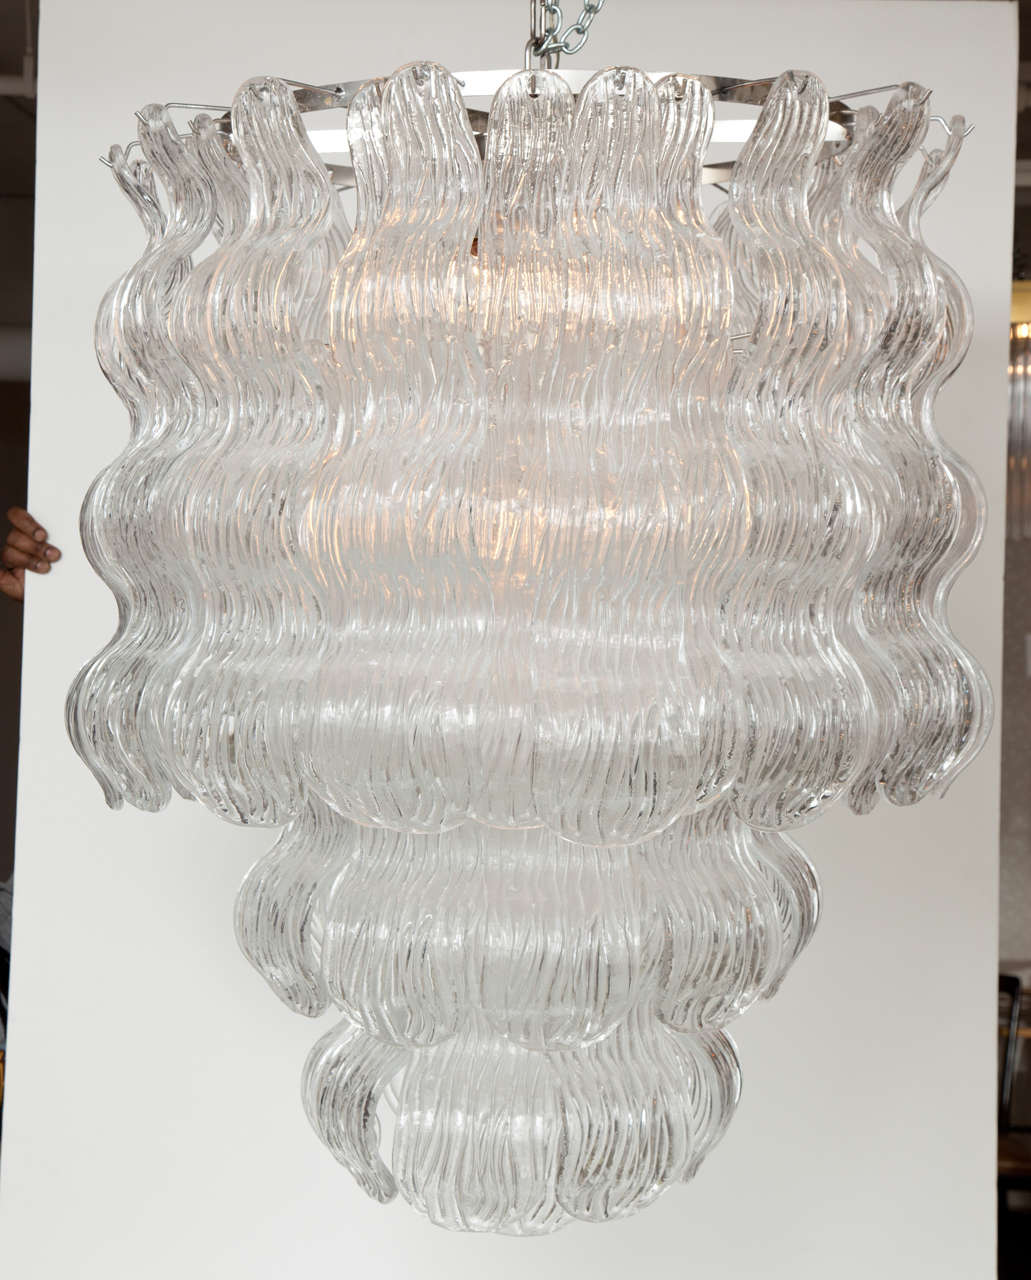 Each Murano glass has the shape of a wave